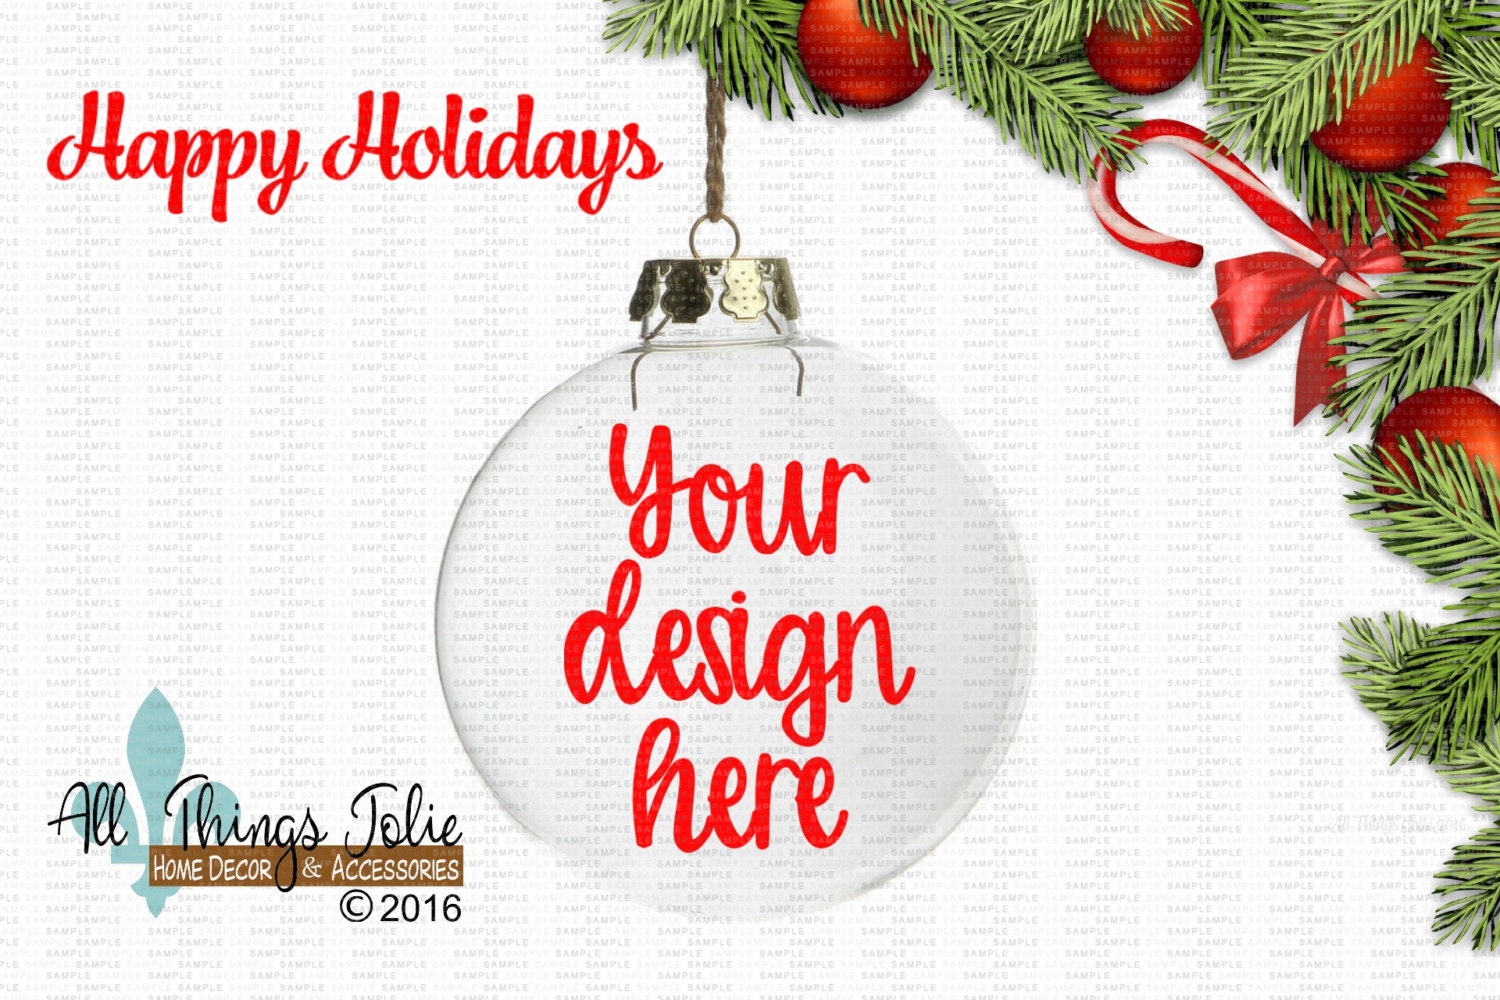 Download Christmas Ornament Mockup Photo Clear Christmas Ornament